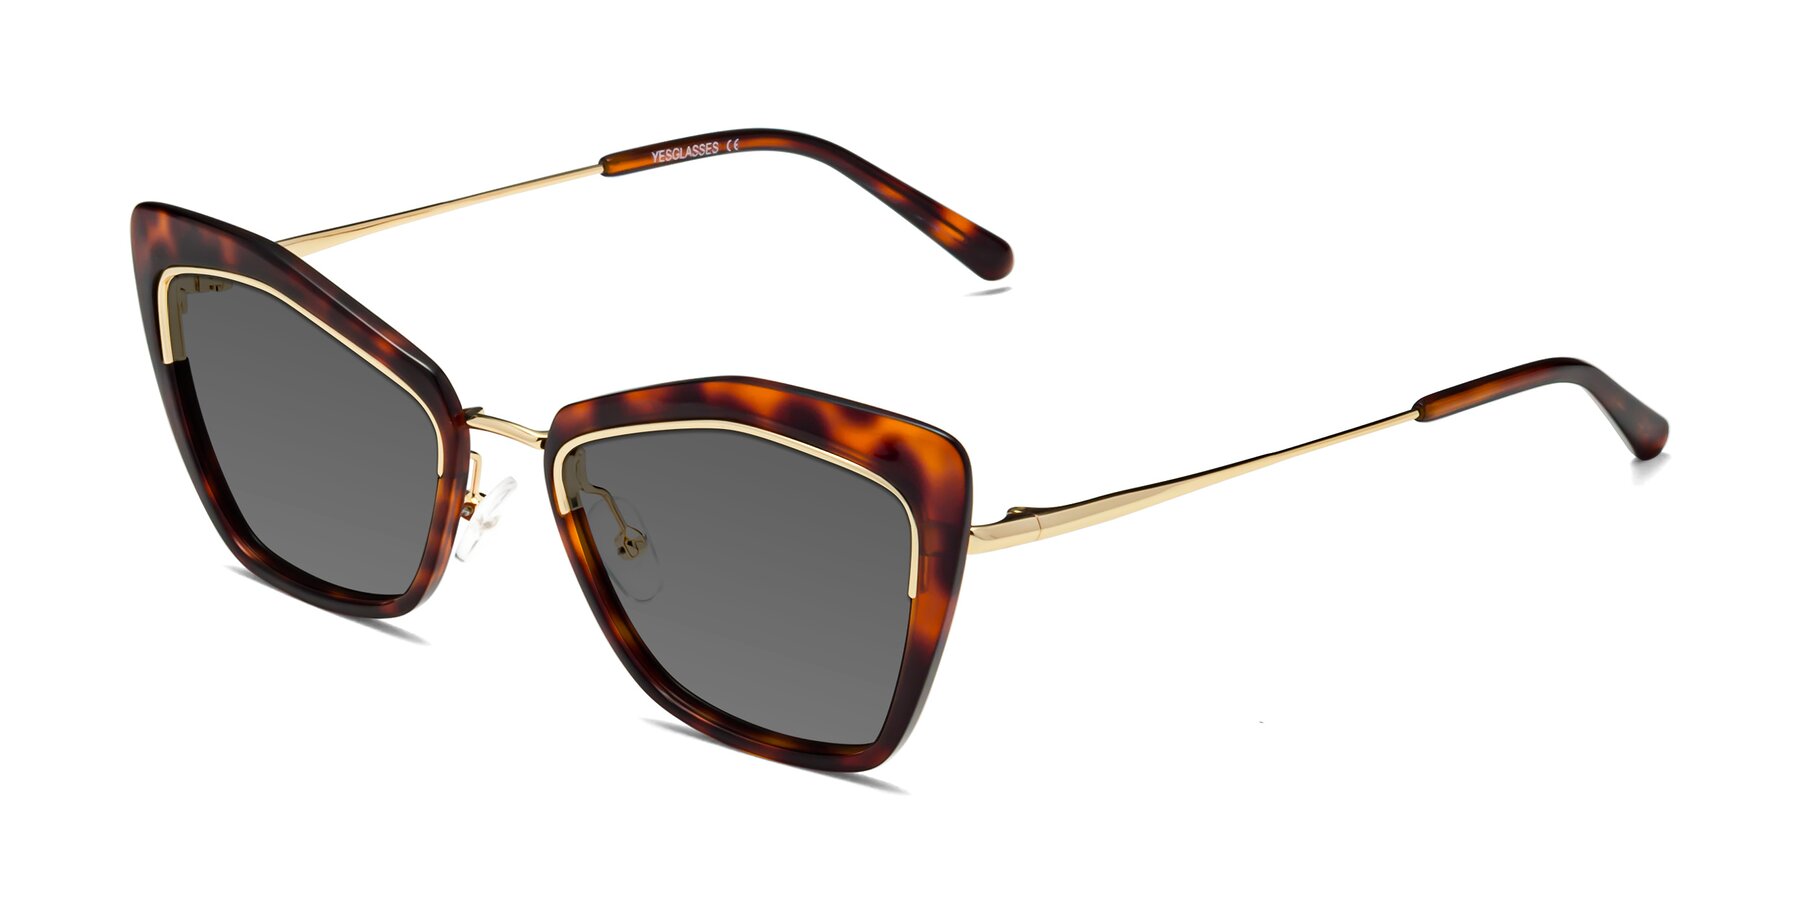 Angle of Lasso in Light Tortoise with Medium Gray Tinted Lenses